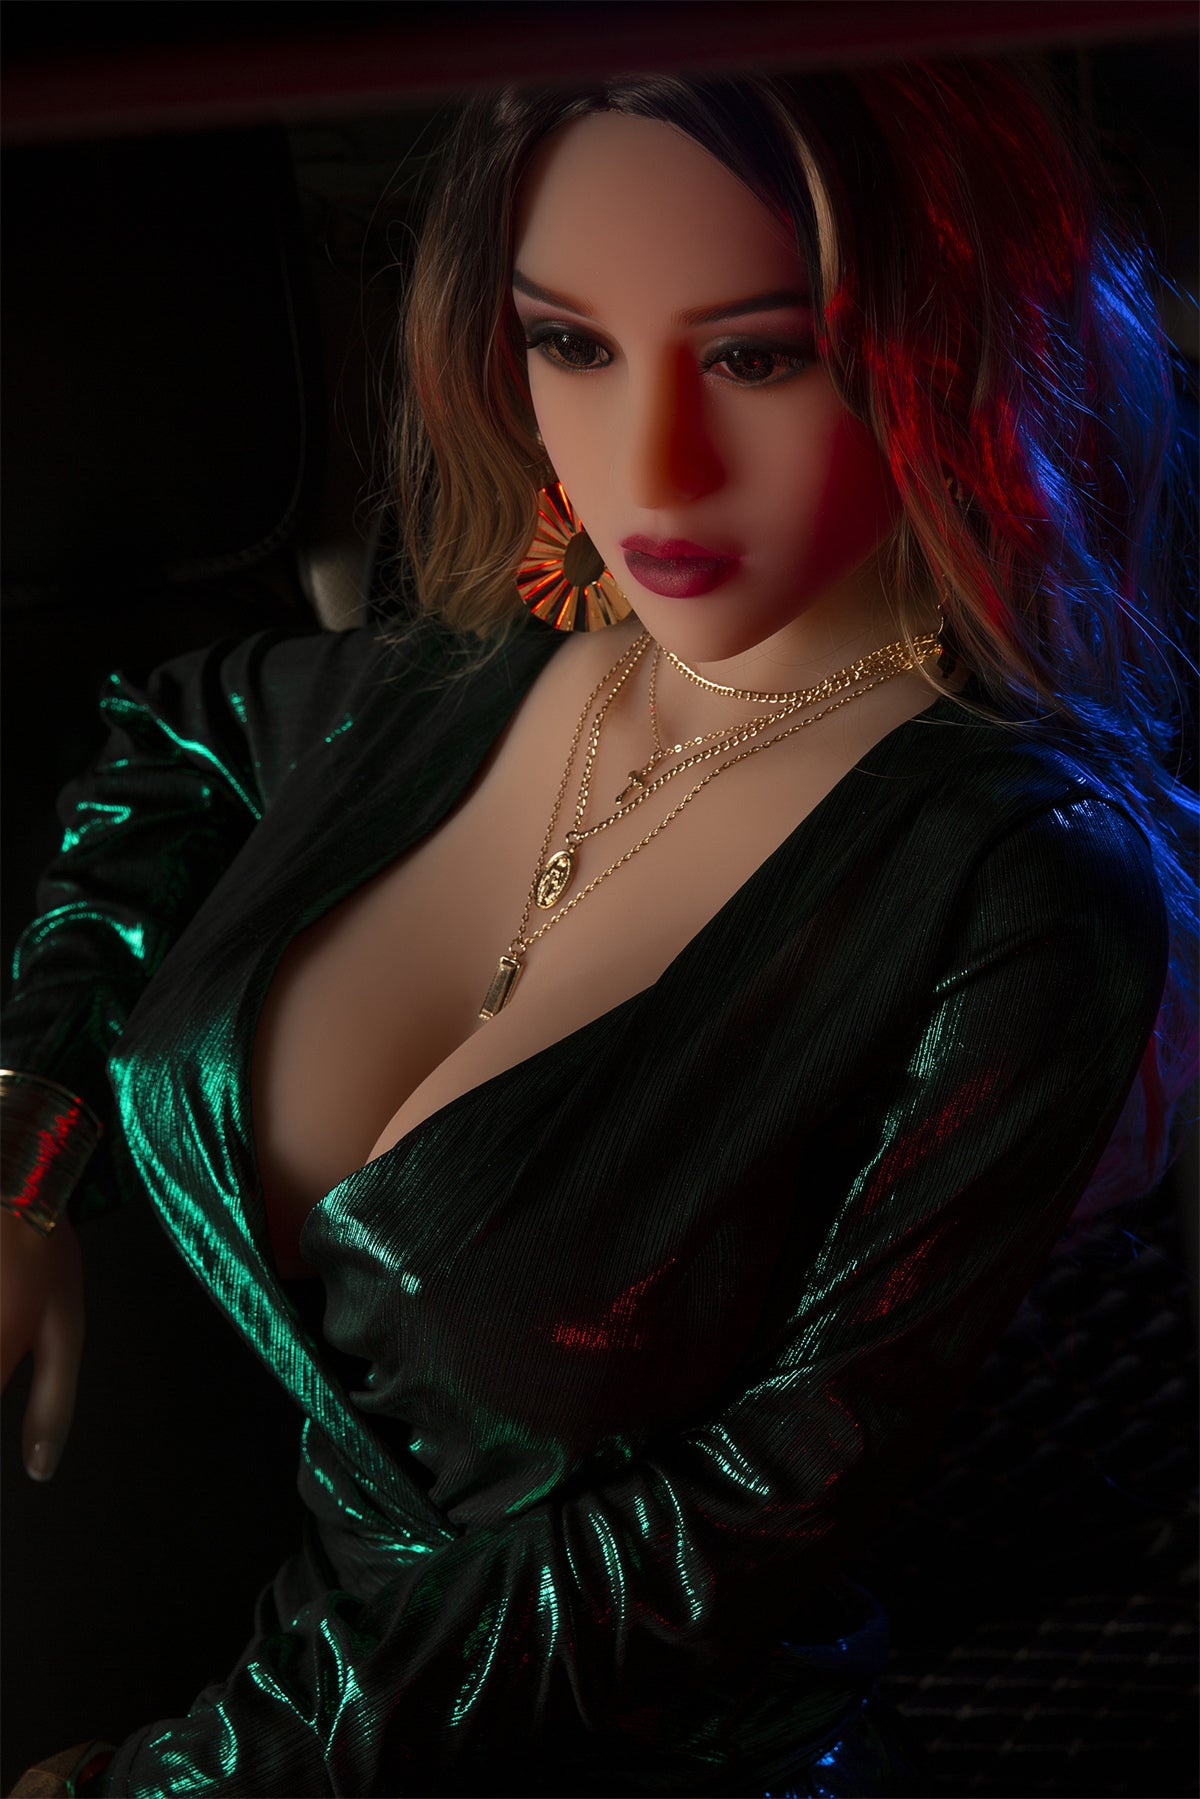 Dollunion TPE | 165cm Shirley Big Breast Man sexual toy factory price real doll fat sex doll rubber sex dolls